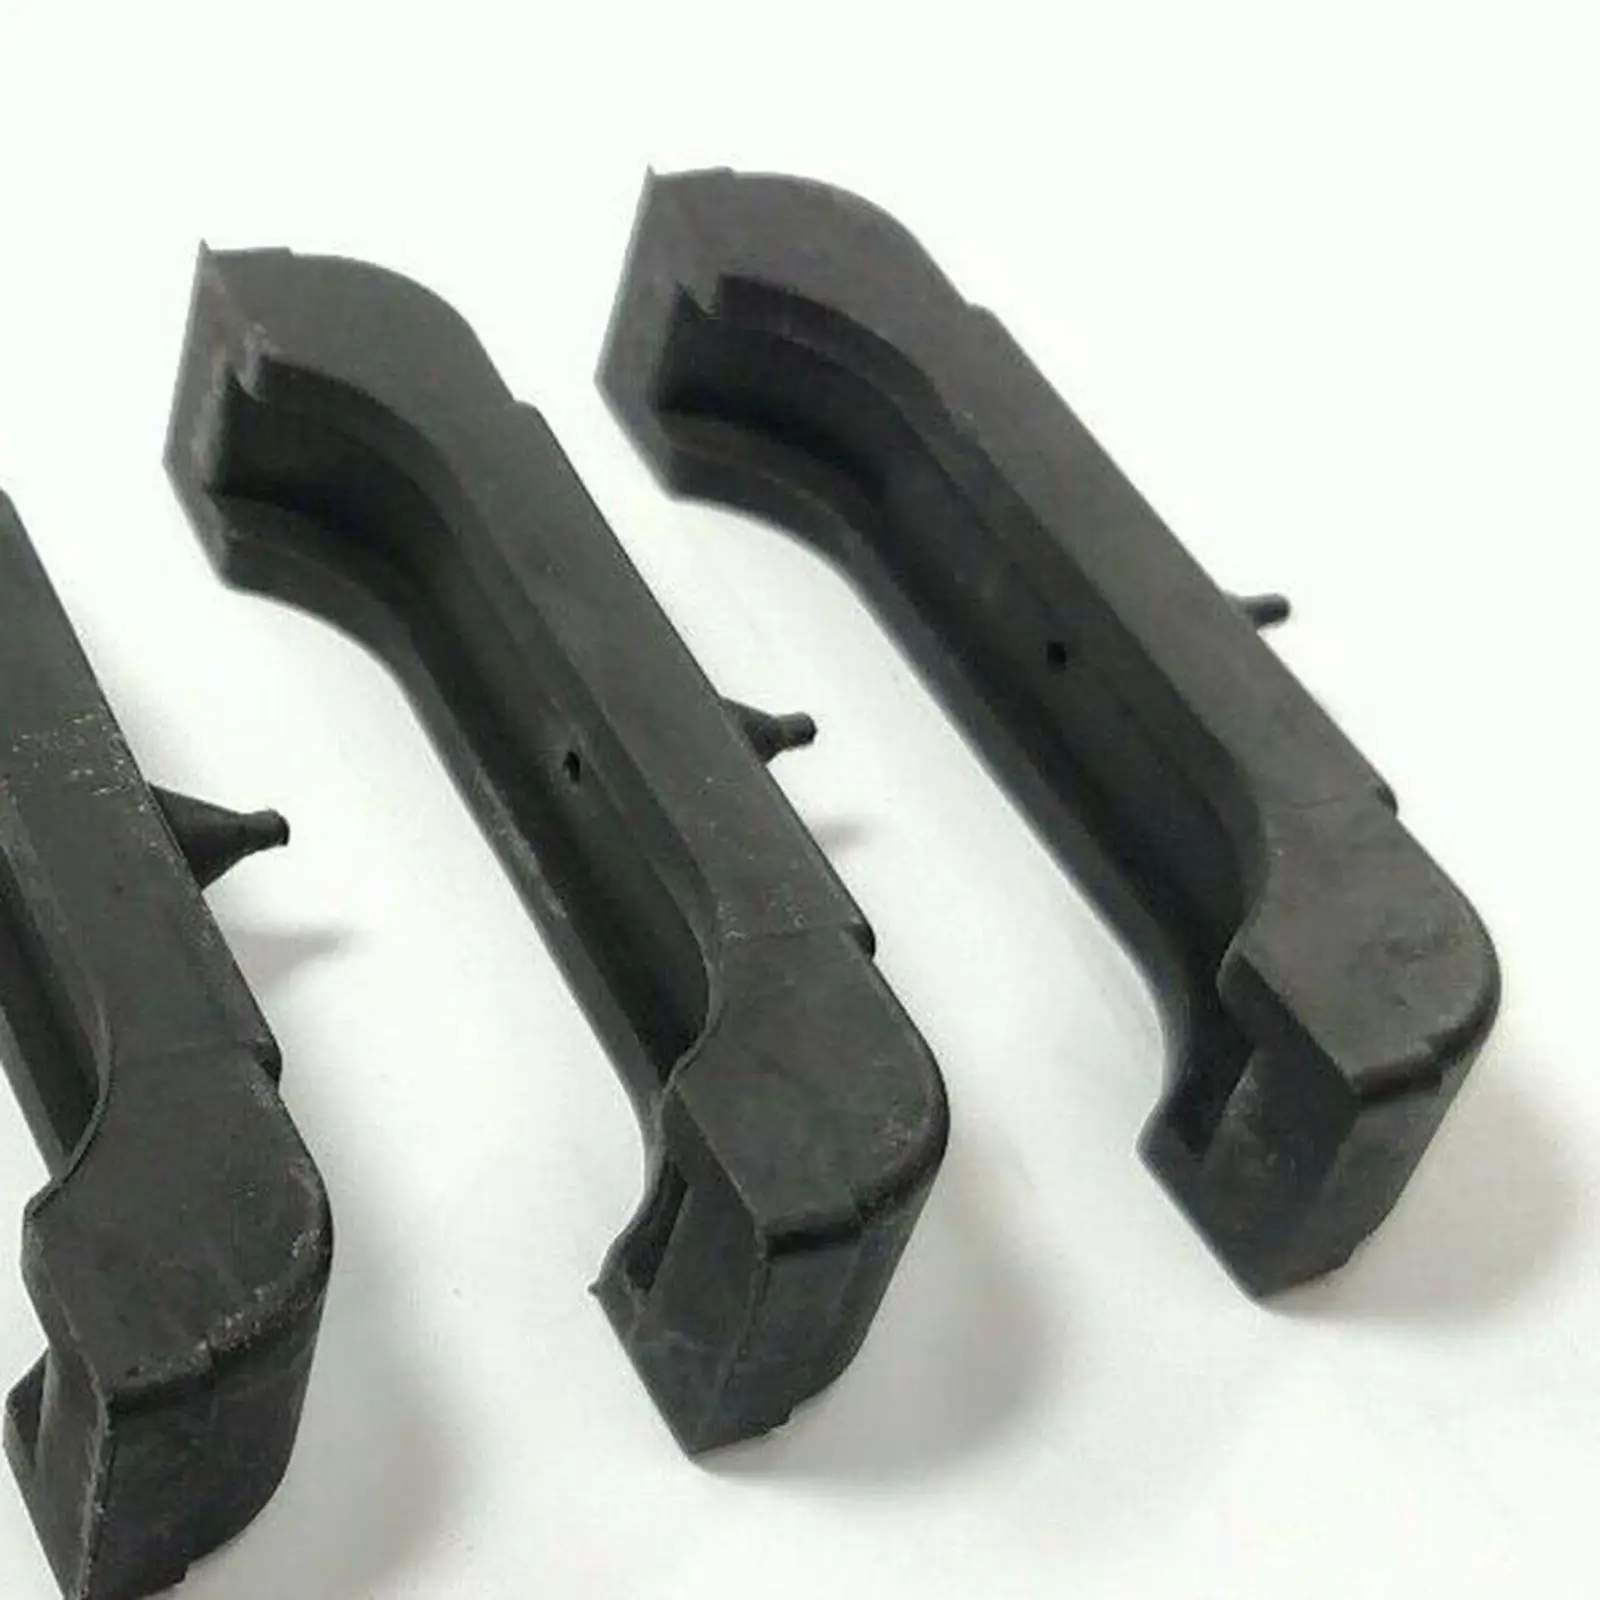 4 Pcs Rubber Support Pads of Radiator Mounting Cushions Fit for GM Cars 1968-1981 Auto Replacement Cooling System Part